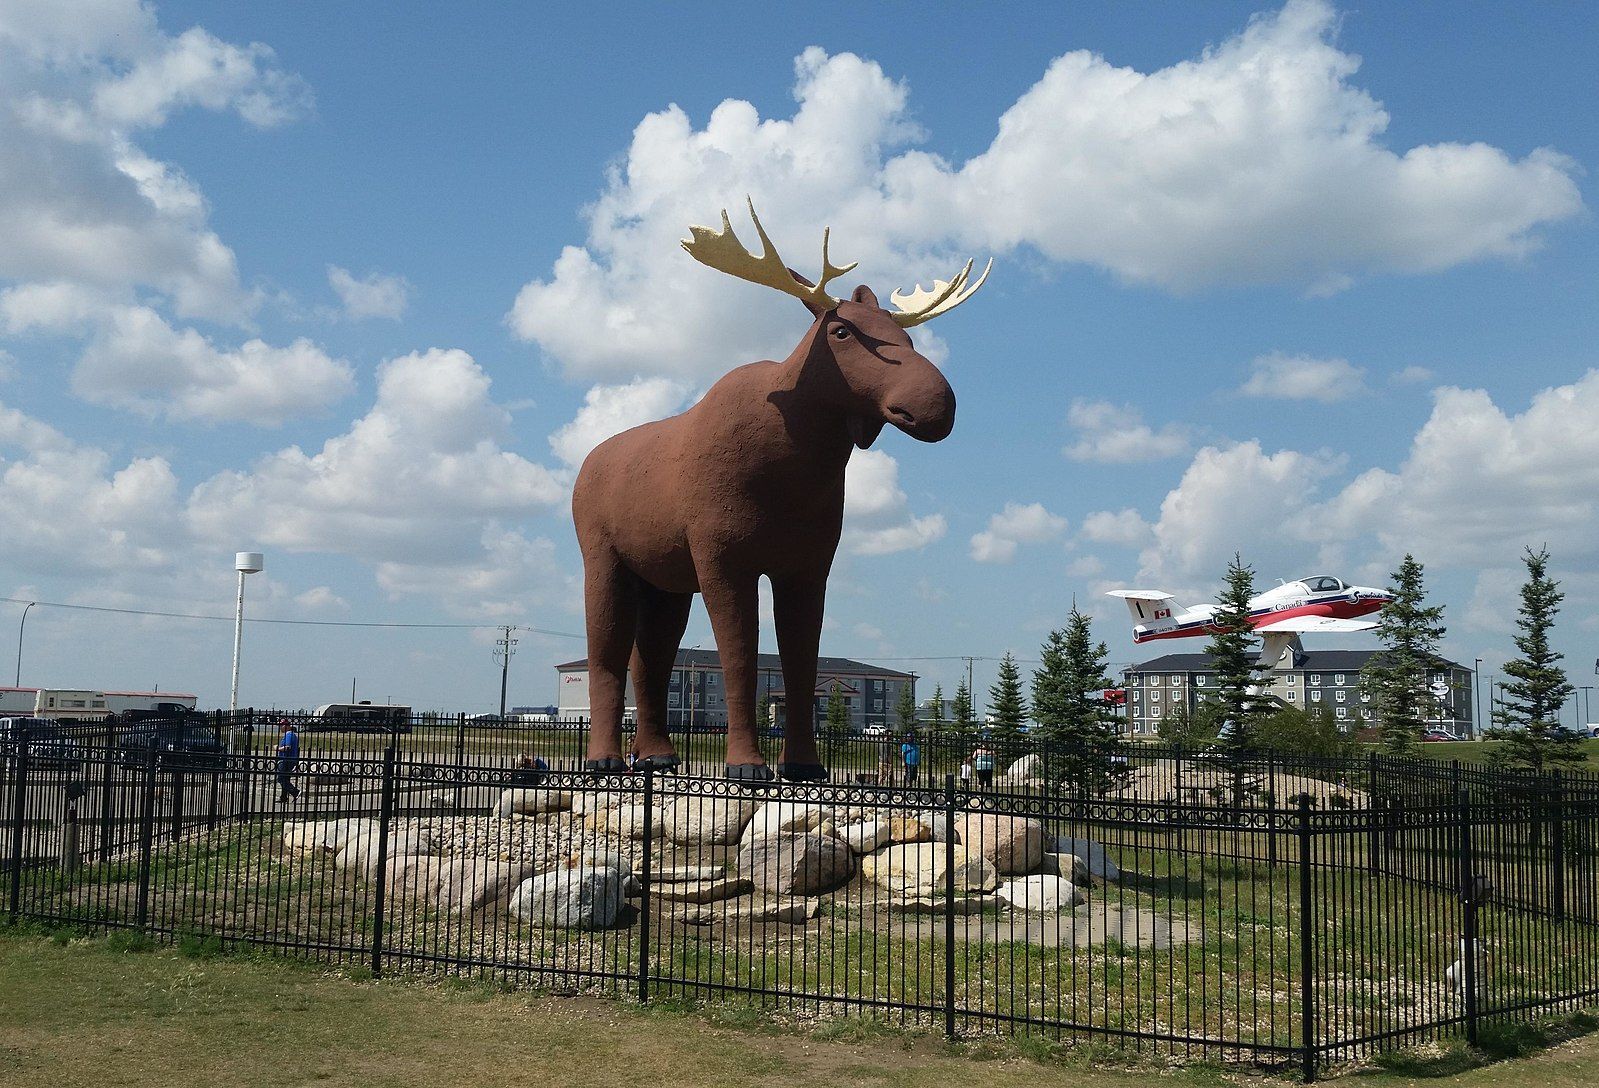 <p>Moose Jaw’s local Mac the Moose stands tall at 10.36 metres (34 feet) along the Trans-Canada Highway in Saskatchewan. This large roadside attraction is more than what it seems. It recently reclaimed its title of <a href="https://www.cbc.ca/news/canada/saskatchewan/mac-moose-tallest-moose-jaw-1.5314141">tallest moose statue in the world</a>, beating out the pristine moose “Storelgen” in east-central Norway. World records and international acclaim aside, Mac has been <a href="https://www.cbc.ca/news/canada/saskatchewan/late-show-international-headlines-canada-norway-dispute-1.4989335">dissed for resembling a papier mâché dog</a> by one late-night talk-show host. Perhaps the statue is only worth it as a short stop rather than the final destination of your Saskatchewan road trip. </p>